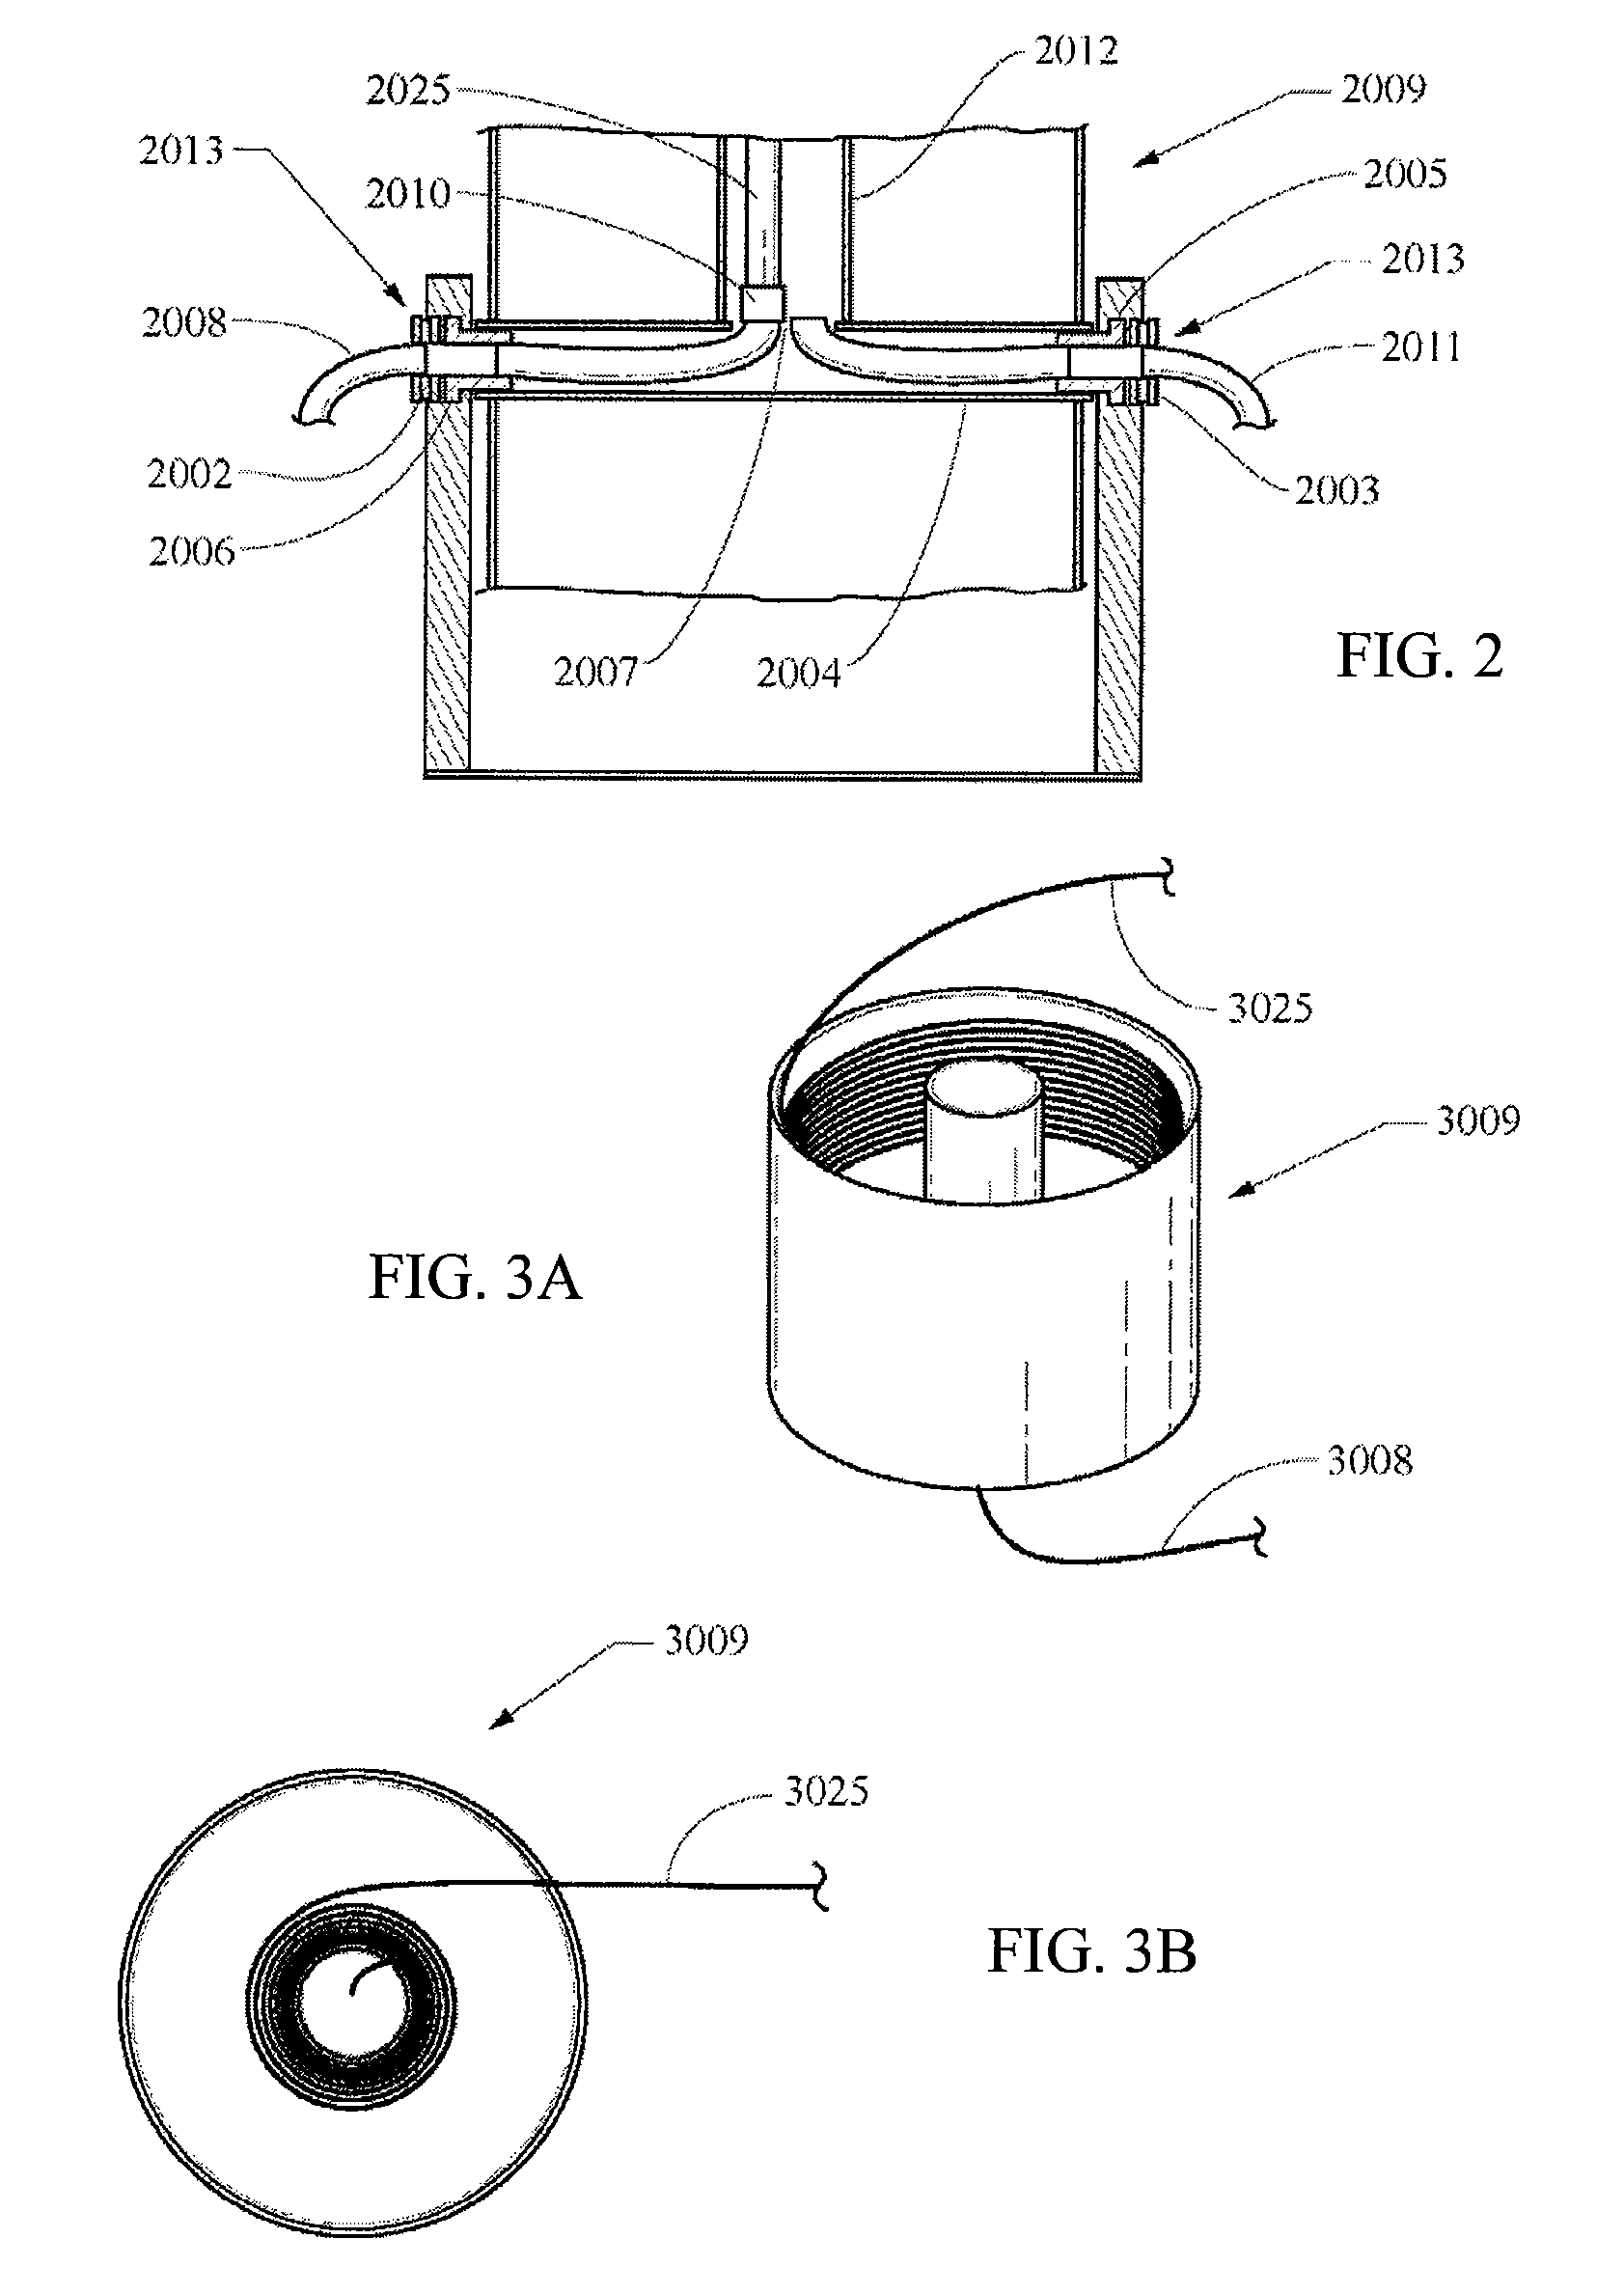 Method and system for advancement of a borehole using a high power laser